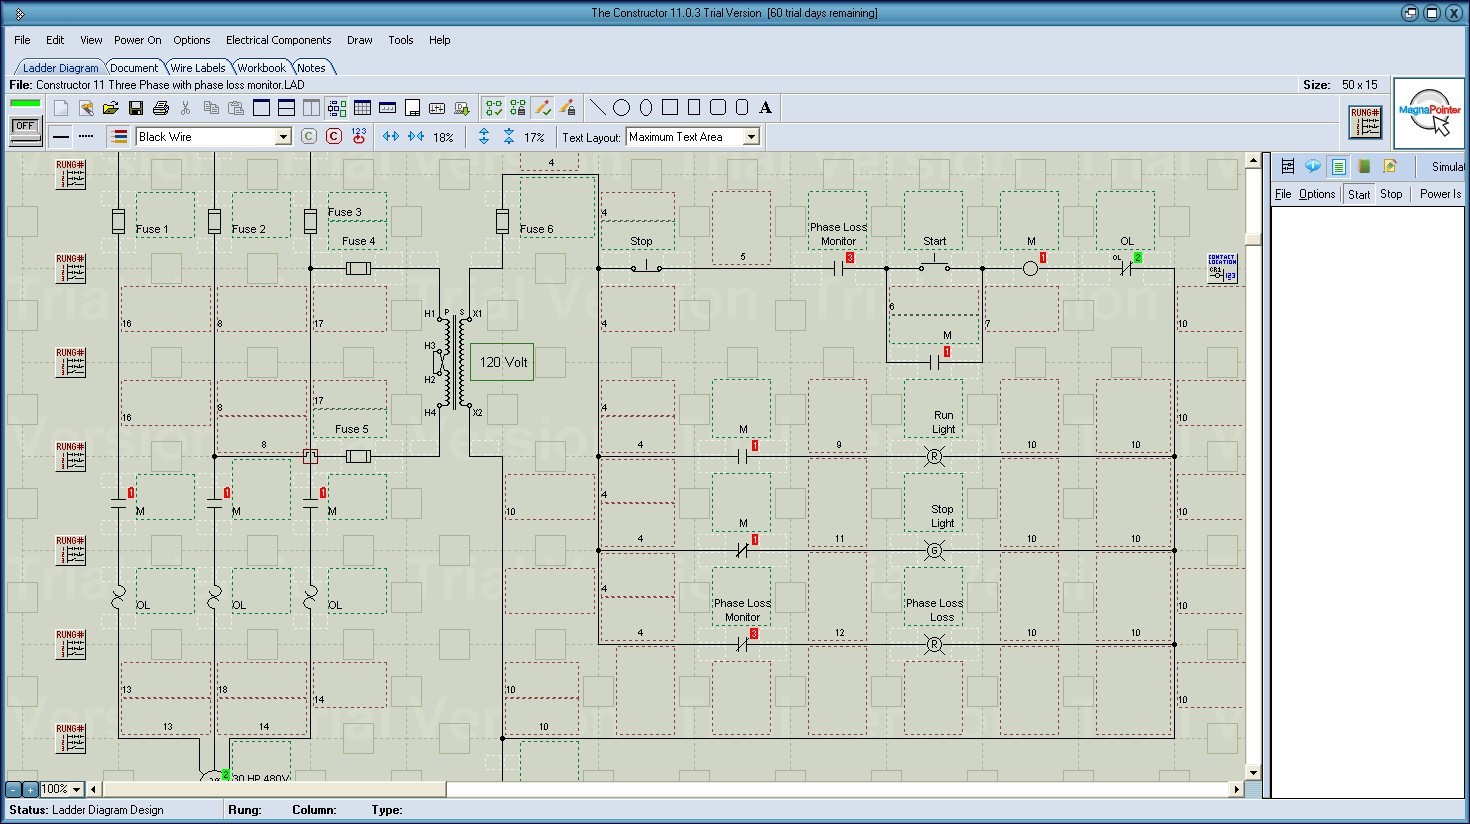 cmh constructor viewer